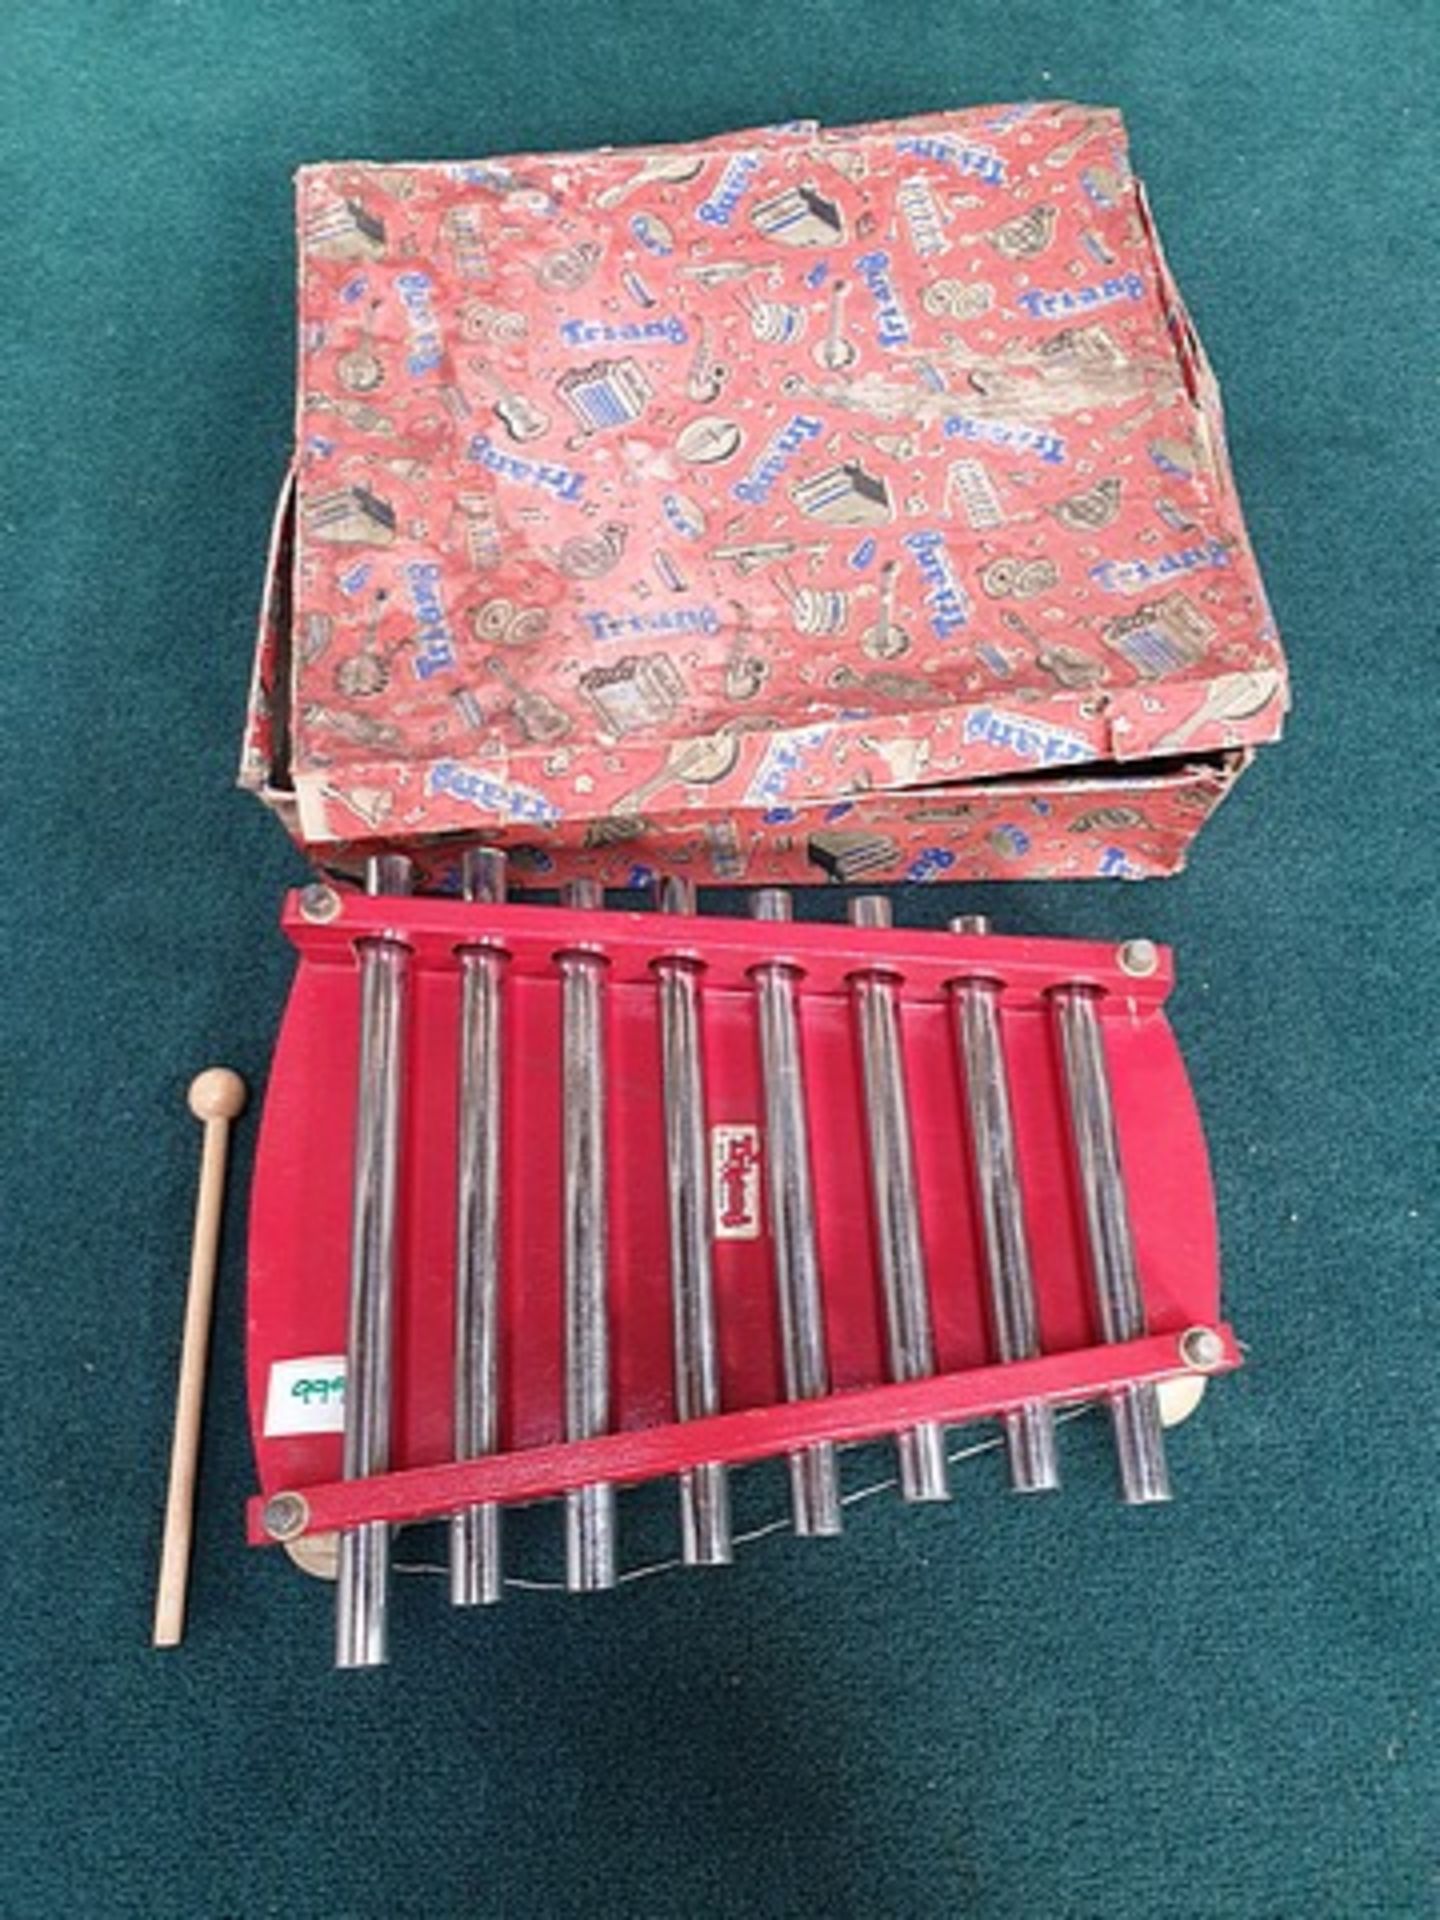 Tri-Ang Xylophone Complete With Box